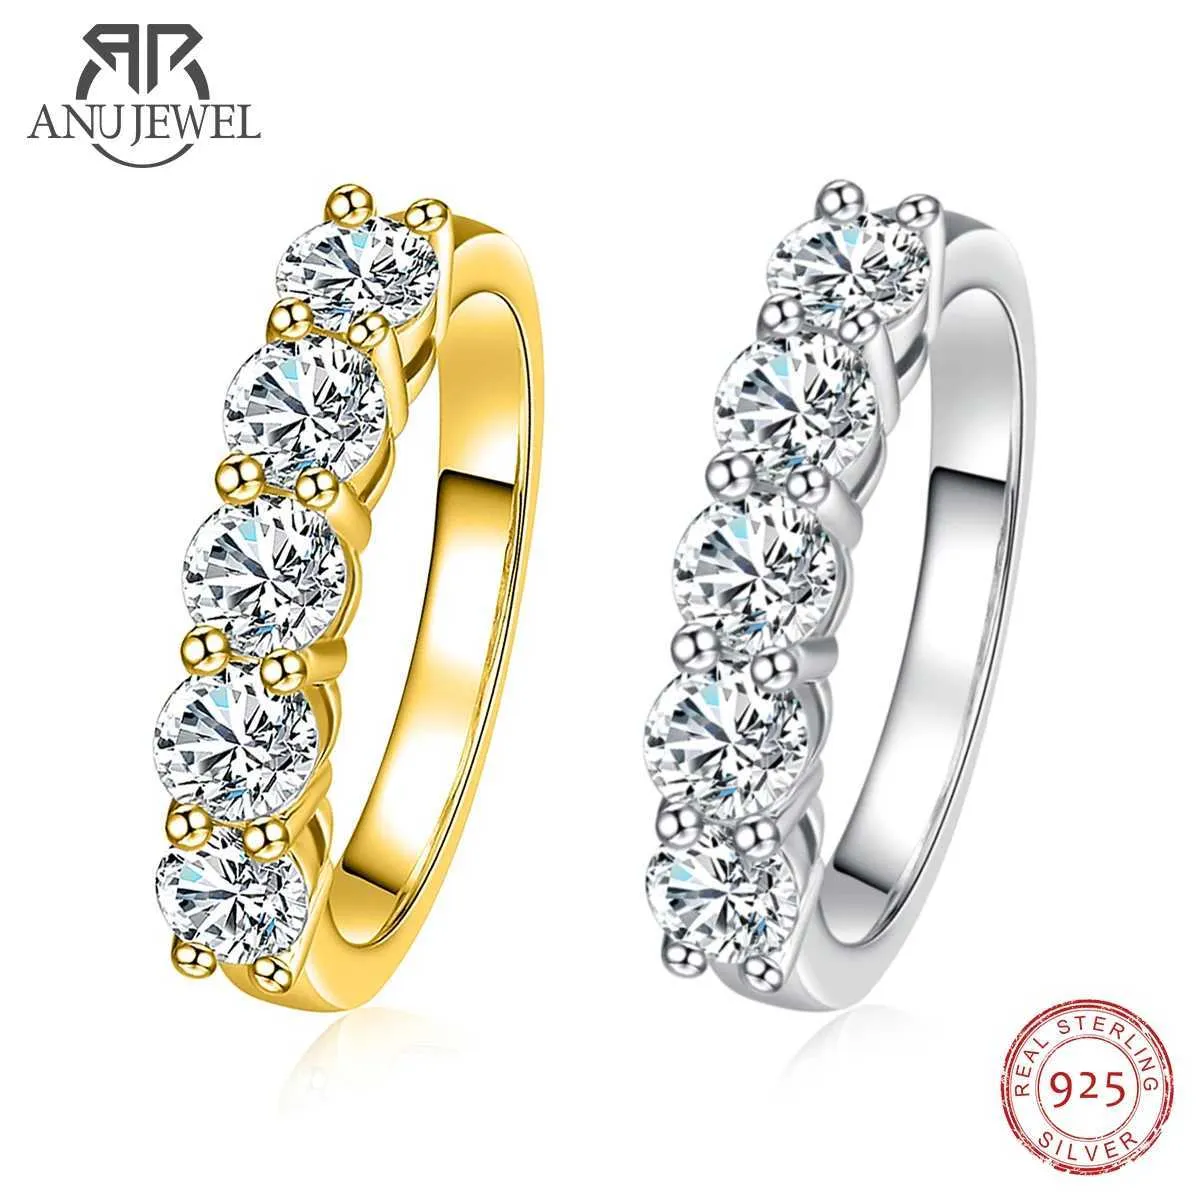 Band Rings AnuJewel 4mm D Color Moissanite WeddBand R 925 SterlSilver 18K Gold Plated Eternity Band Engagament Rings Wholesale J240118